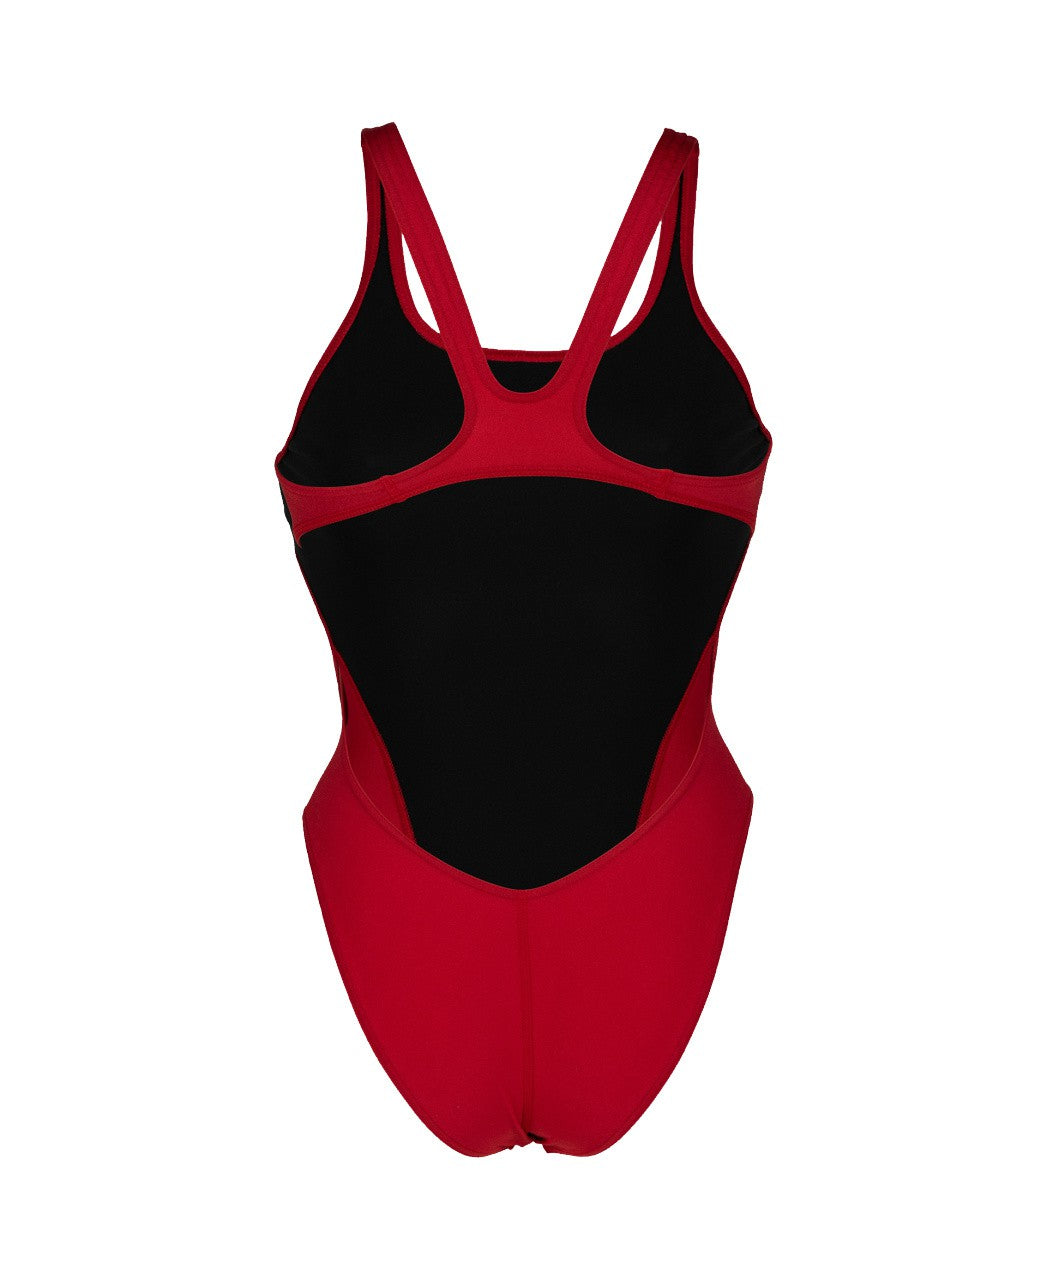 W Team Swimsuit Swim Tech Solid red-white